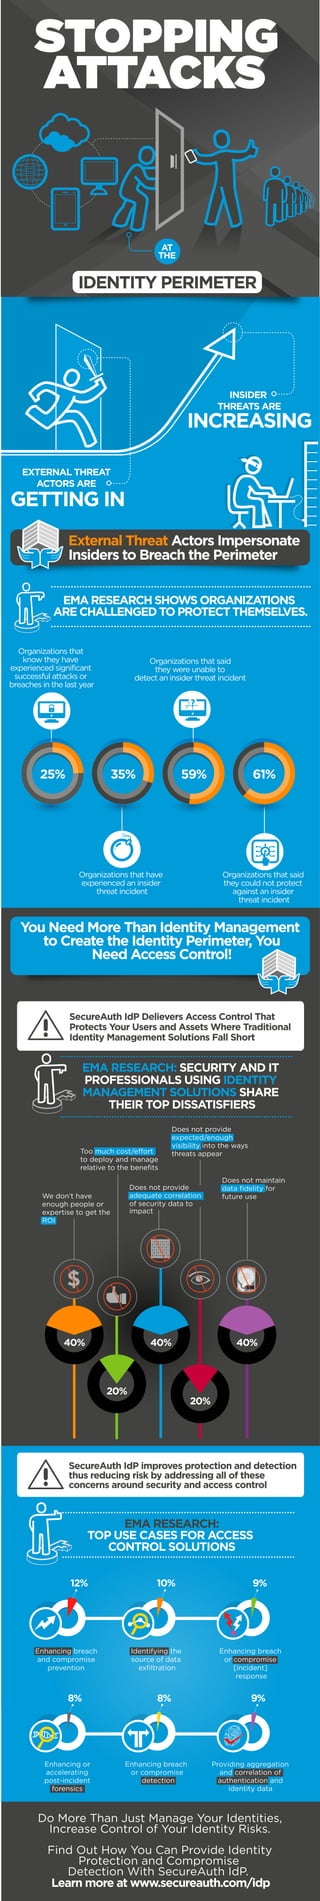 EXTERNAL THREAT
ACTORS ARE
GETTING IN
INSIDER
THREATS ARE
INCREASING
External Threat Actors Impersonate
Insiders to Breach the Perimeter
You Need More Than Identity Management
to Create the Identity Perimeter, You
Need Access Control!
Organizations that said
they could not protect
against an insider
threat incident
25% 35% 59% 61%
Organizations that
know they have
experienced significant
successful attacks or
breaches in the last year
Organizations that have
experienced an insider
threat incident
Organizations that said
they were unable to
detect an insider threat incident
EMA RESEARCH: SECURITY AND IT
PROFESSIONALS USING IDENTITY
MANAGEMENT SOLUTIONS SHARE
THEIR TOP DISSATISFIERS
Enhancing breach
and compromise
prevention
Enhancing or
accelerating
post-incident
forensics
Identifying the
source of data
exfiltration
Enhancing breach
or compromise
detection
Do More Than Just Manage Your Identities,
Increase Control of Your Identity Risks.
AT
THE
EMA RESEARCH:
TOP USE CASES FOR ACCESS
CONTROL SOLUTIONS
IDENTITY PERIMETER
STOPPING
ATTACKS
Enhancing breach
or compromise
[incident]
response
Providing aggregation
and correlation of
authentication and
identity data
12% 10% 9%
8% 8% 9%
?
SecureAuth IdP improves protection and detection
thus reducing risk by addressing all of these
concerns around security and access control
SecureAuth IdP Delievers Access Control That
Protects Your Users and Assets Where Traditional
Identity Management Solutions Fall Short
Find Out How You Can Provide Identity
Protection and Compromise
Detection With SecureAuth IdP.
Learn more at www.secureauth.com/idp
EMARESEARCHSHOWSORGANIZATIONS
ARECHALLENGEDTOPROTECTTHEMSELVES.
We don’t have
enough people or
expertise to get the
ROI
Too much cost/effort
to deploy and manage
relative to the benefits
Does not provide
expected/enough
visibility into the ways
threats appear
Does not provide
adequate correlation
of security data to
impact
40% 40%
20%
20%
Does not maintain
data fidelity for
future use
40%
 